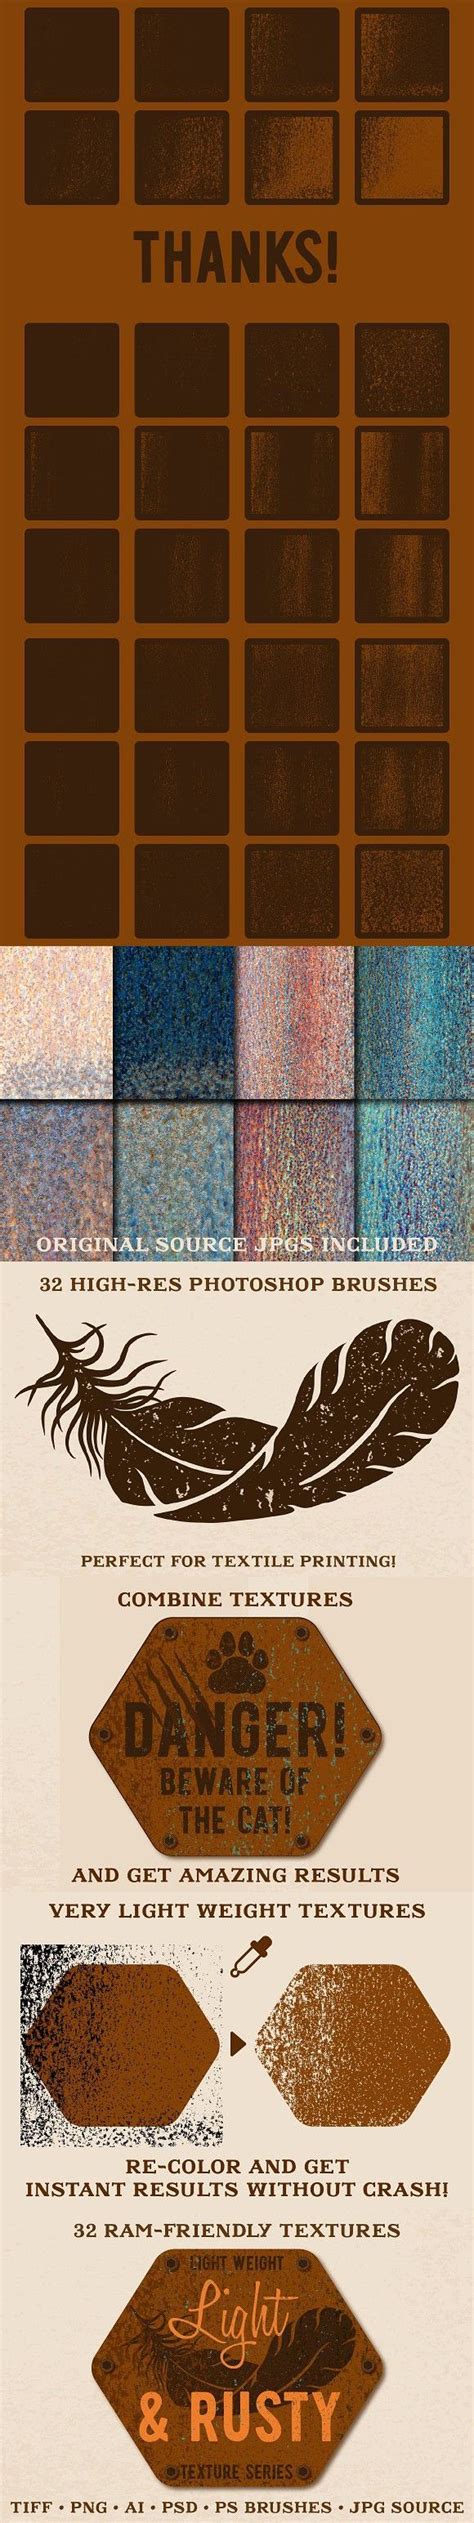 Light And Rusty Texture Pack Texture Packs Texture Photoshop Brushes